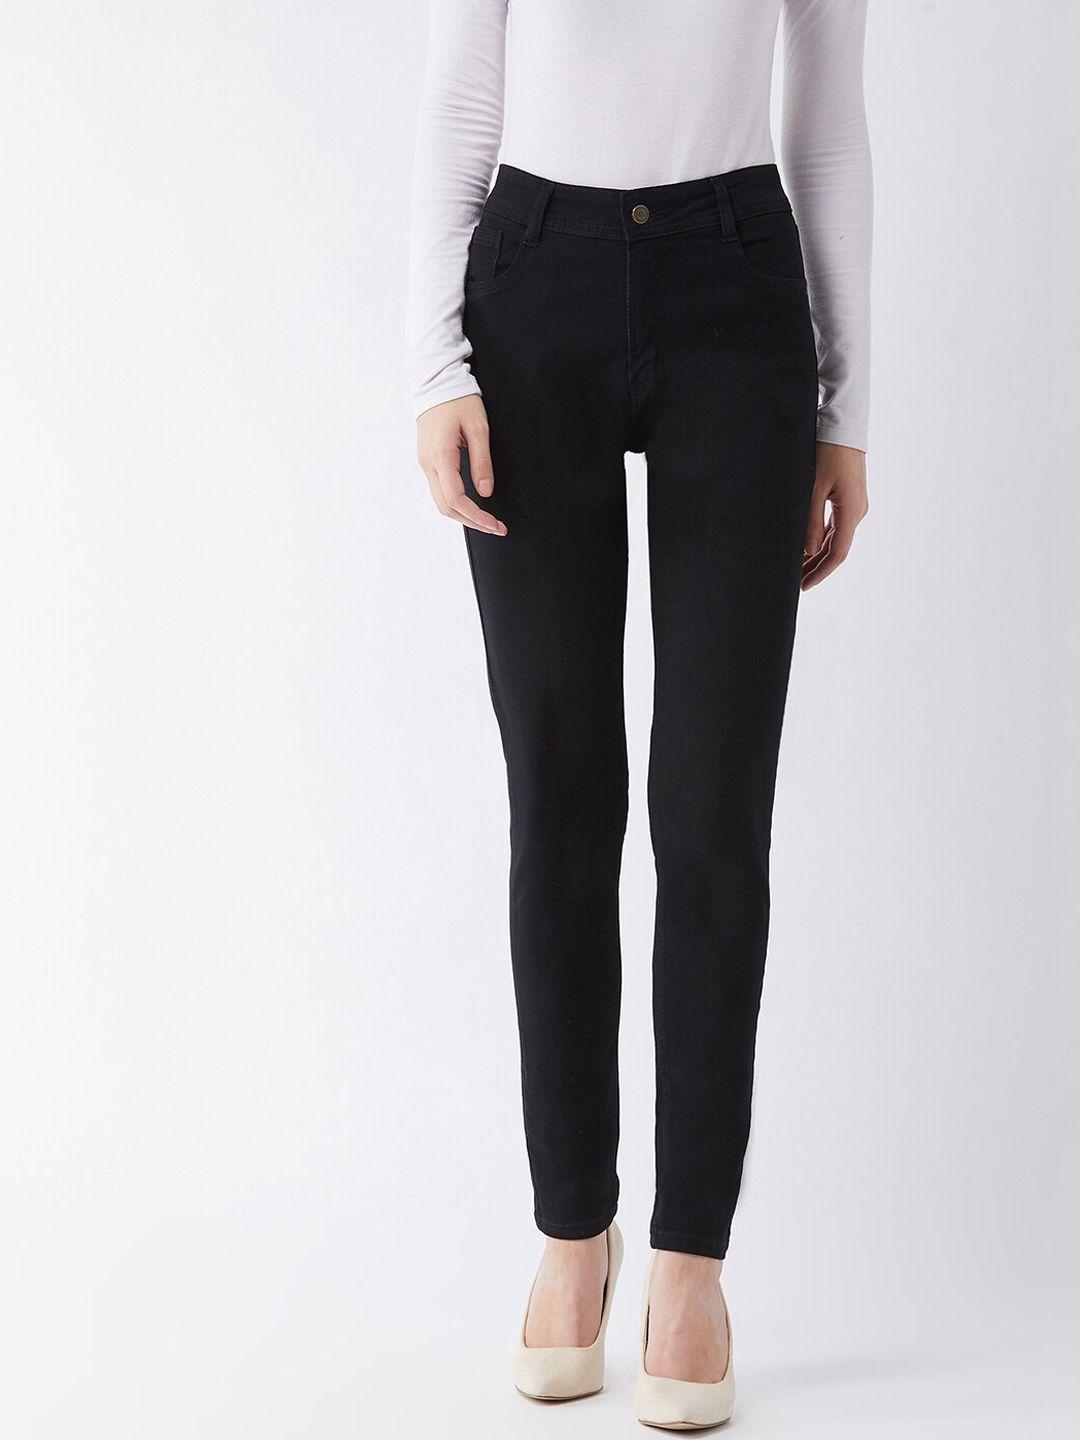 miss-chase-women-black-slim-fit-high-rise-jeans